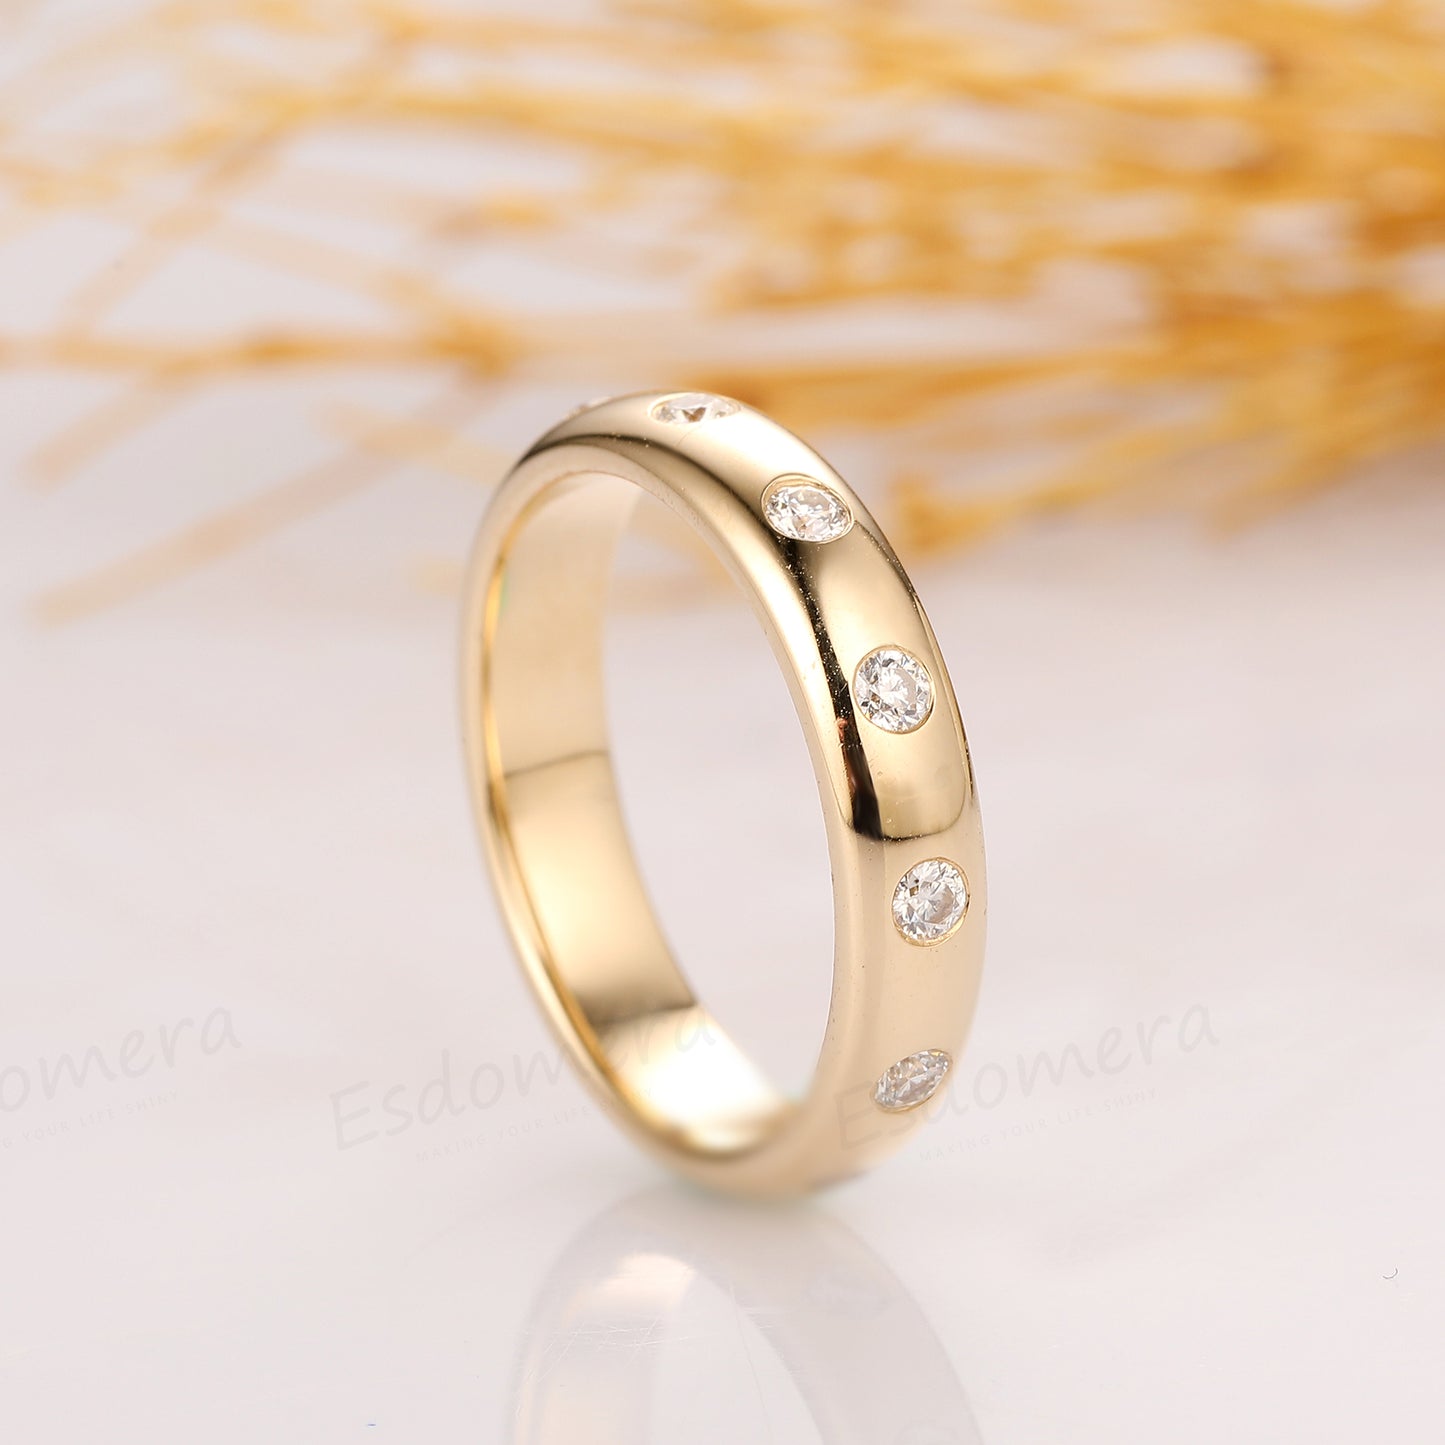 Solid 14K Yellow Gold Moissanite Wedding Band, Brilliant Moissanite Accents Ring